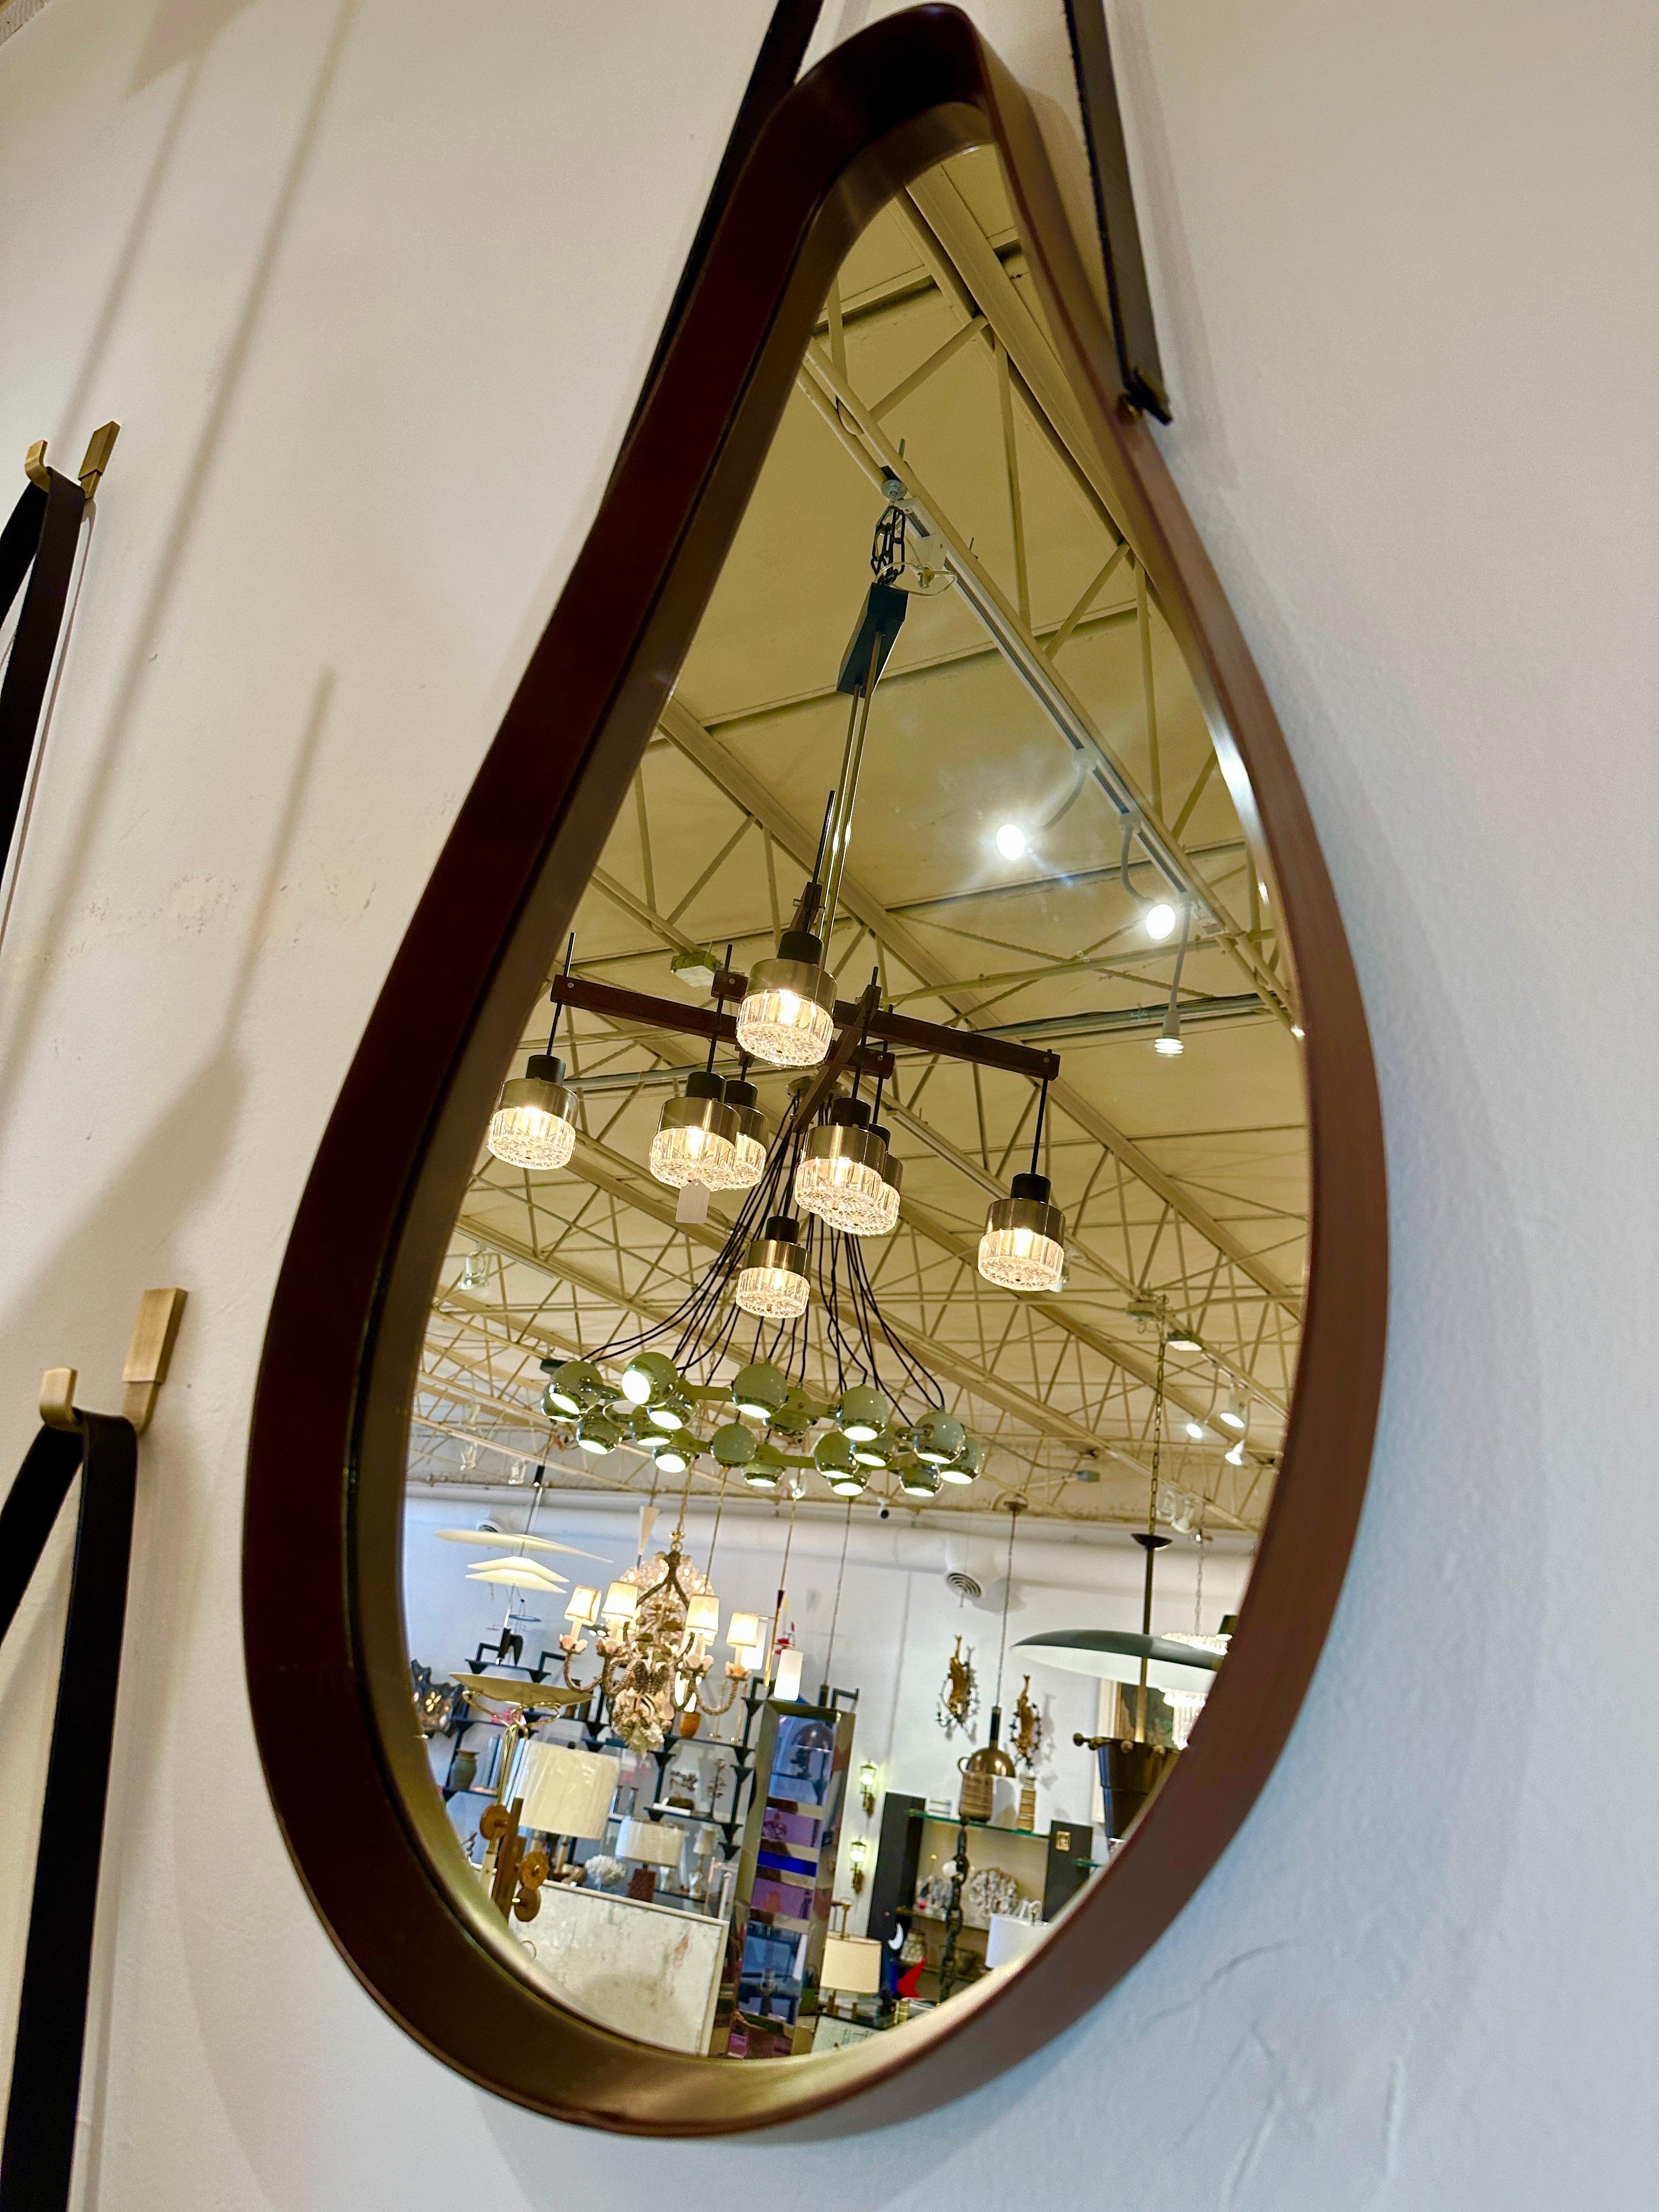 This wonderful Classic Italian midcentury walnut frame mirror in a tear-drop style with a thick leather hanging strap and custom brass hook (included). This beauty is part of a group of THREE (3) that we acquired in our travels. They are sold